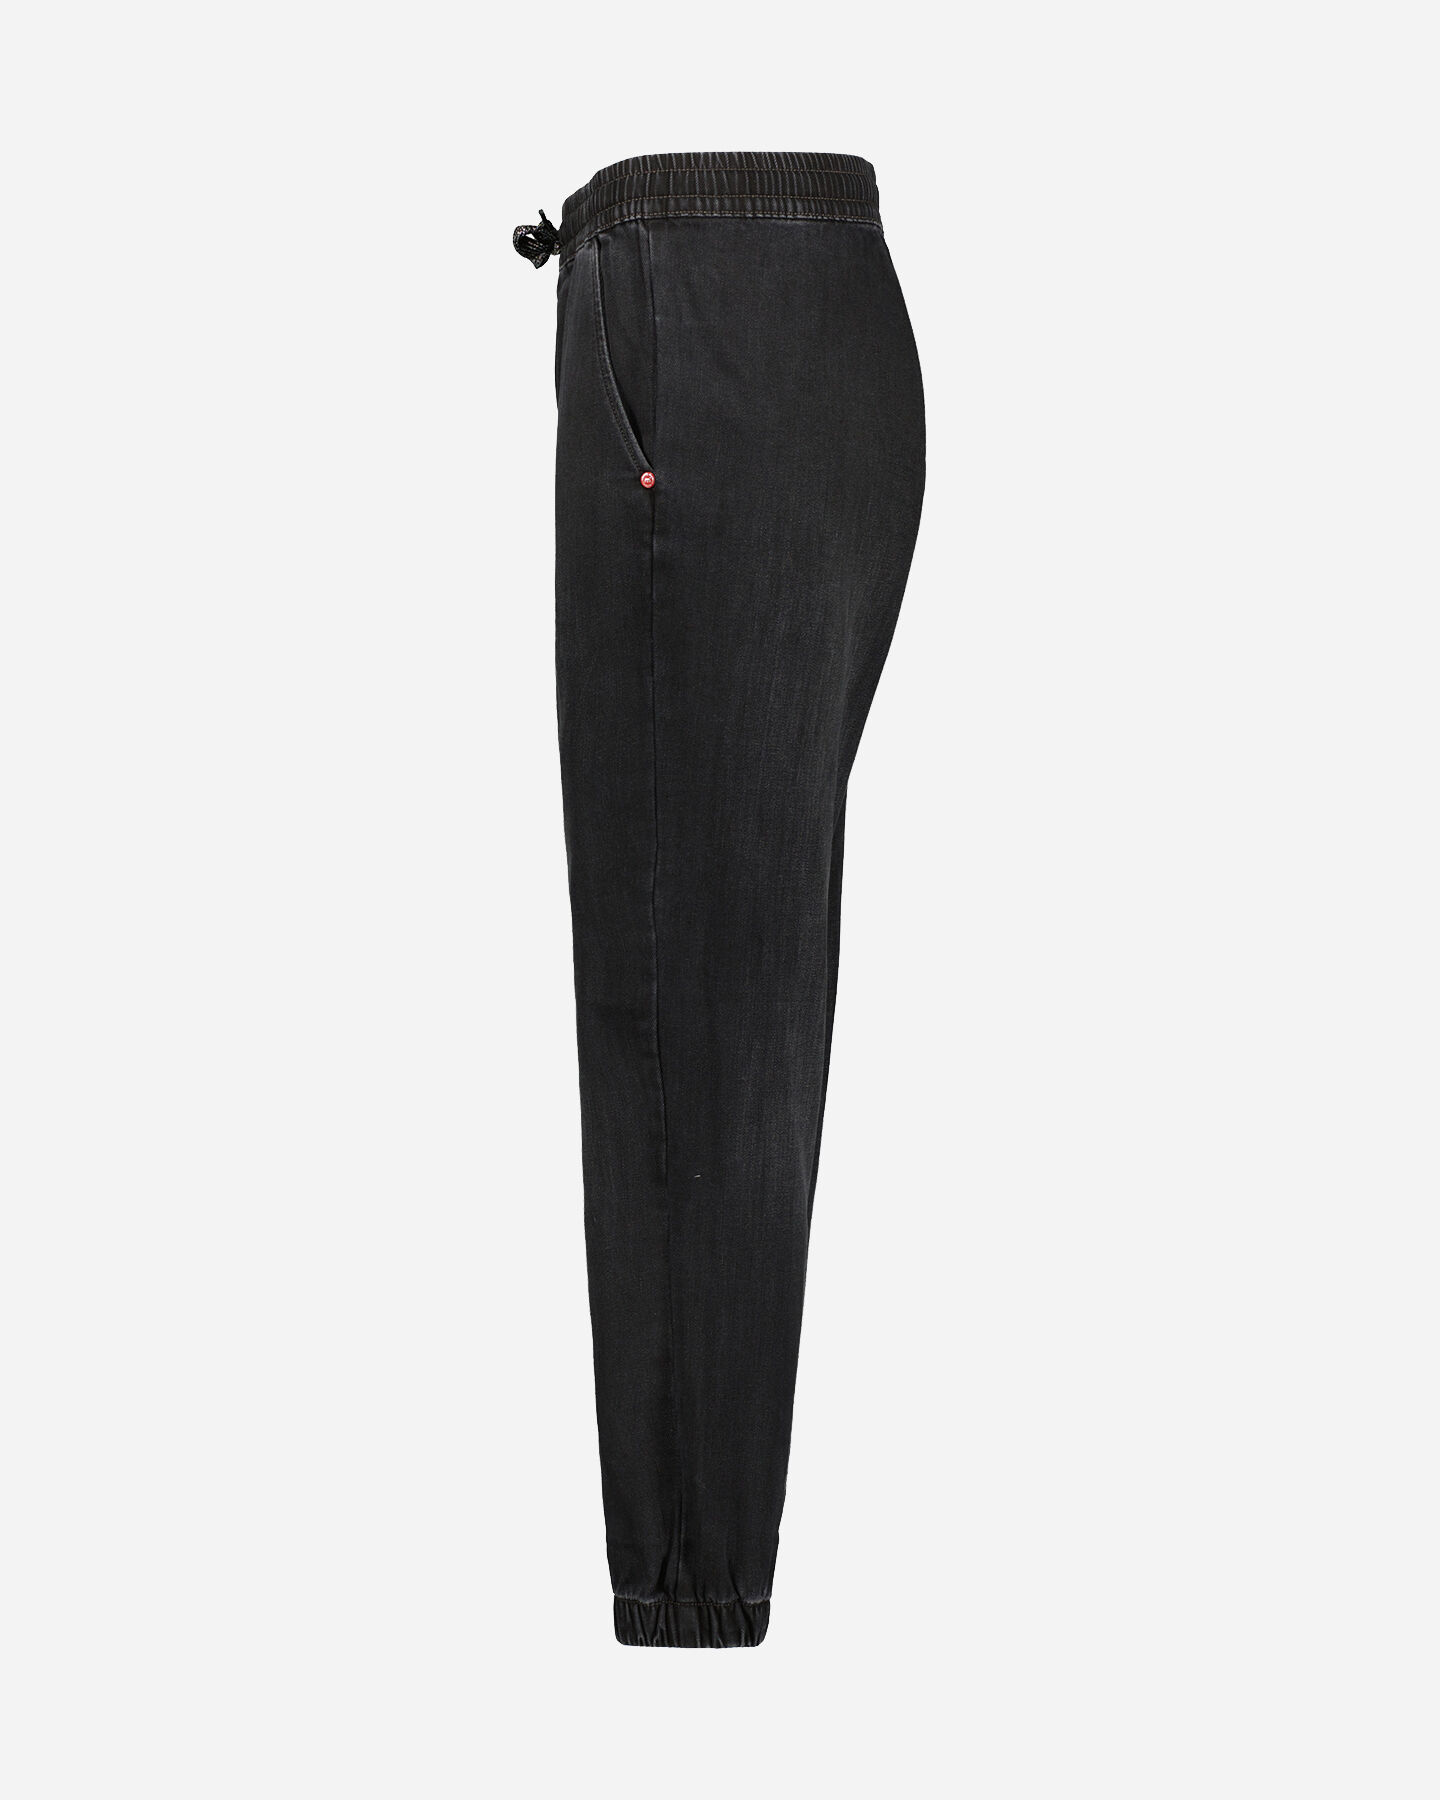  Pantalone MISTRAL JOGGER BRUSHED W S4107948|MD-BLACK|XS scatto 1